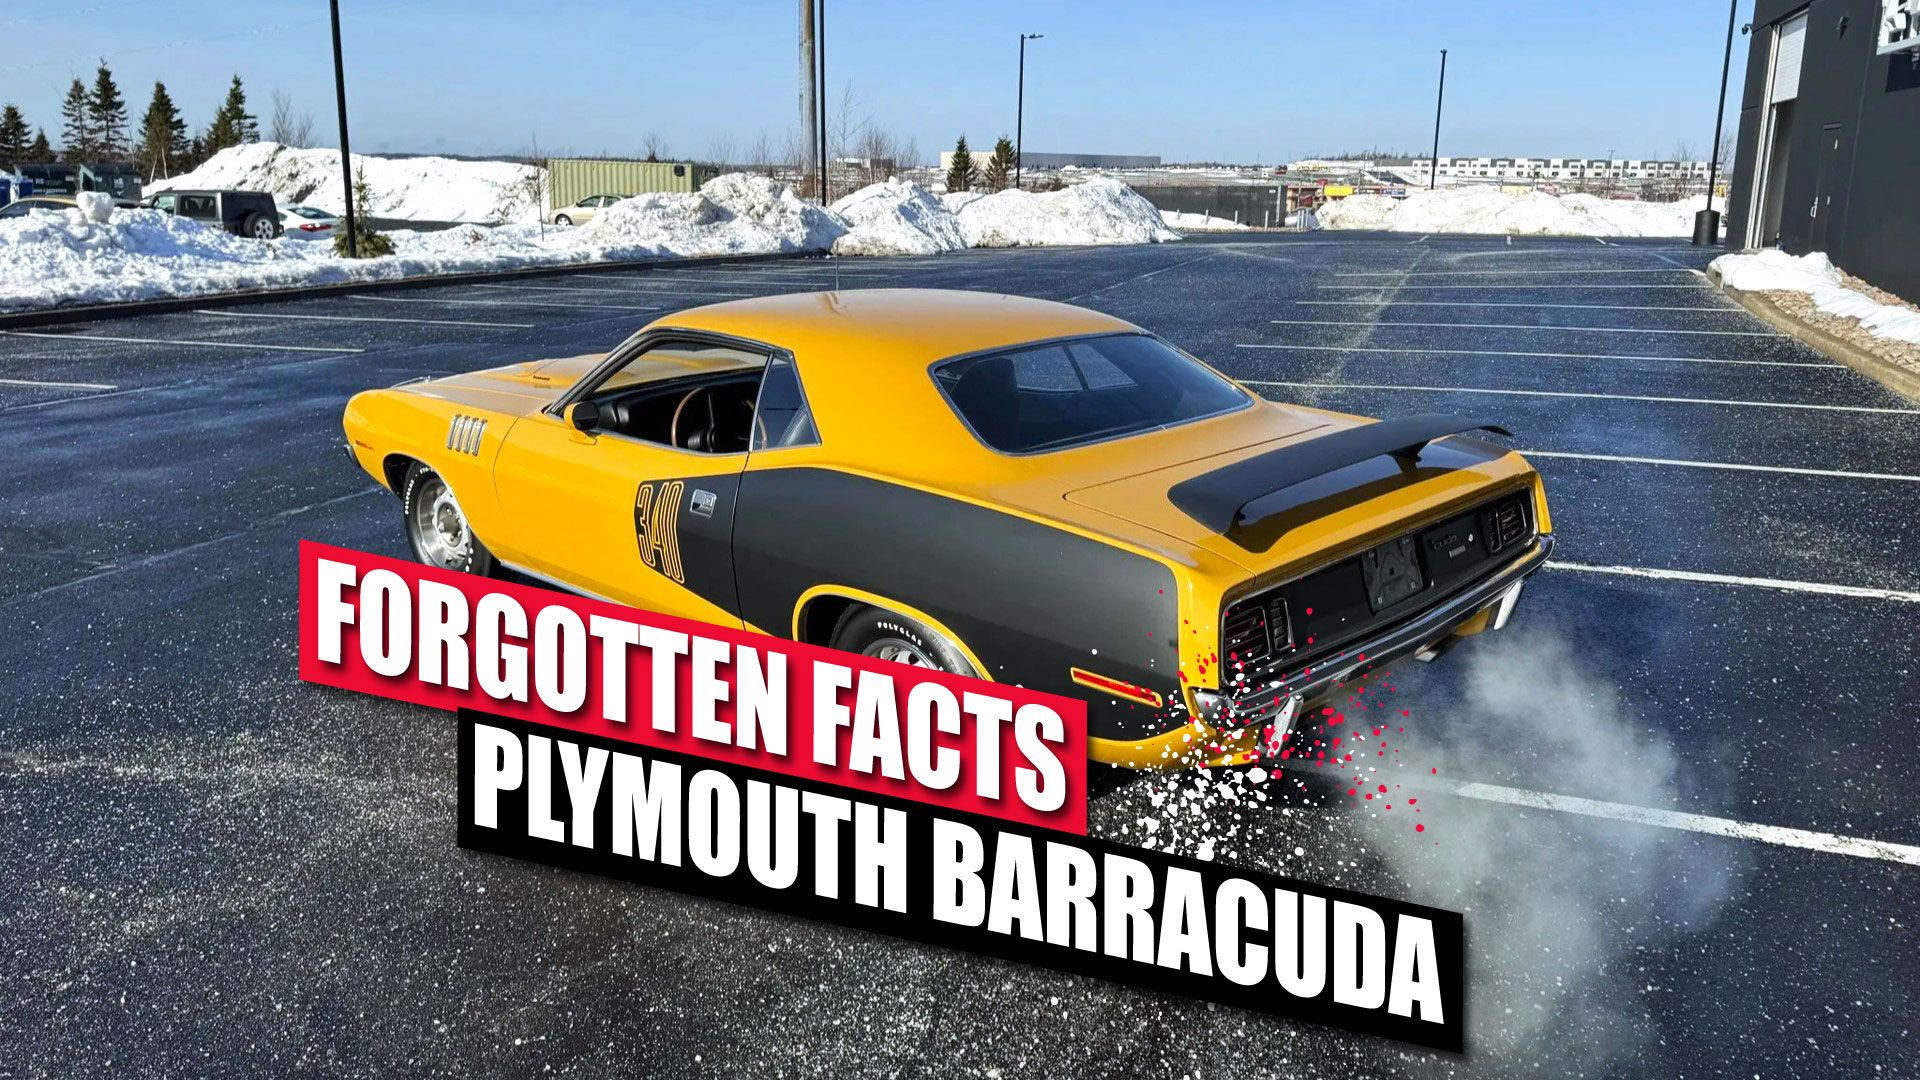 Plymouth Barracuda forgotten facts